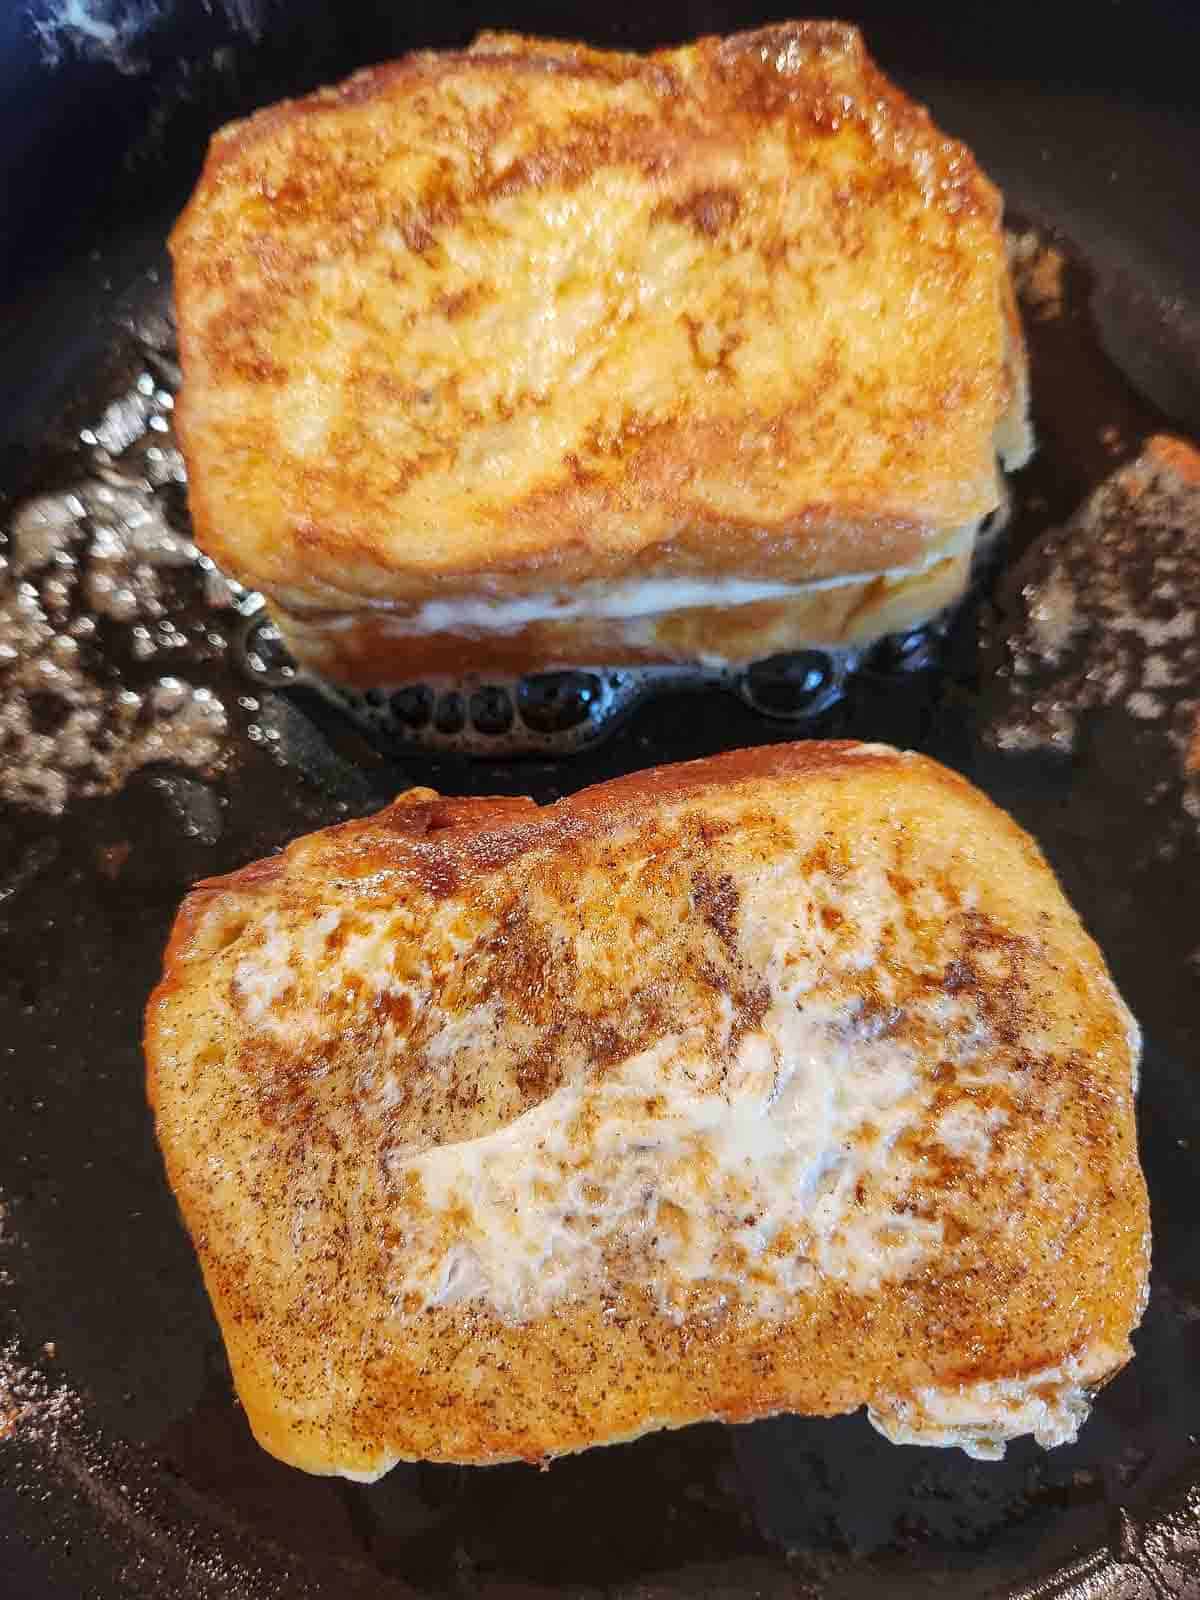 Stuffed French toast cooking on a buttered griddle.